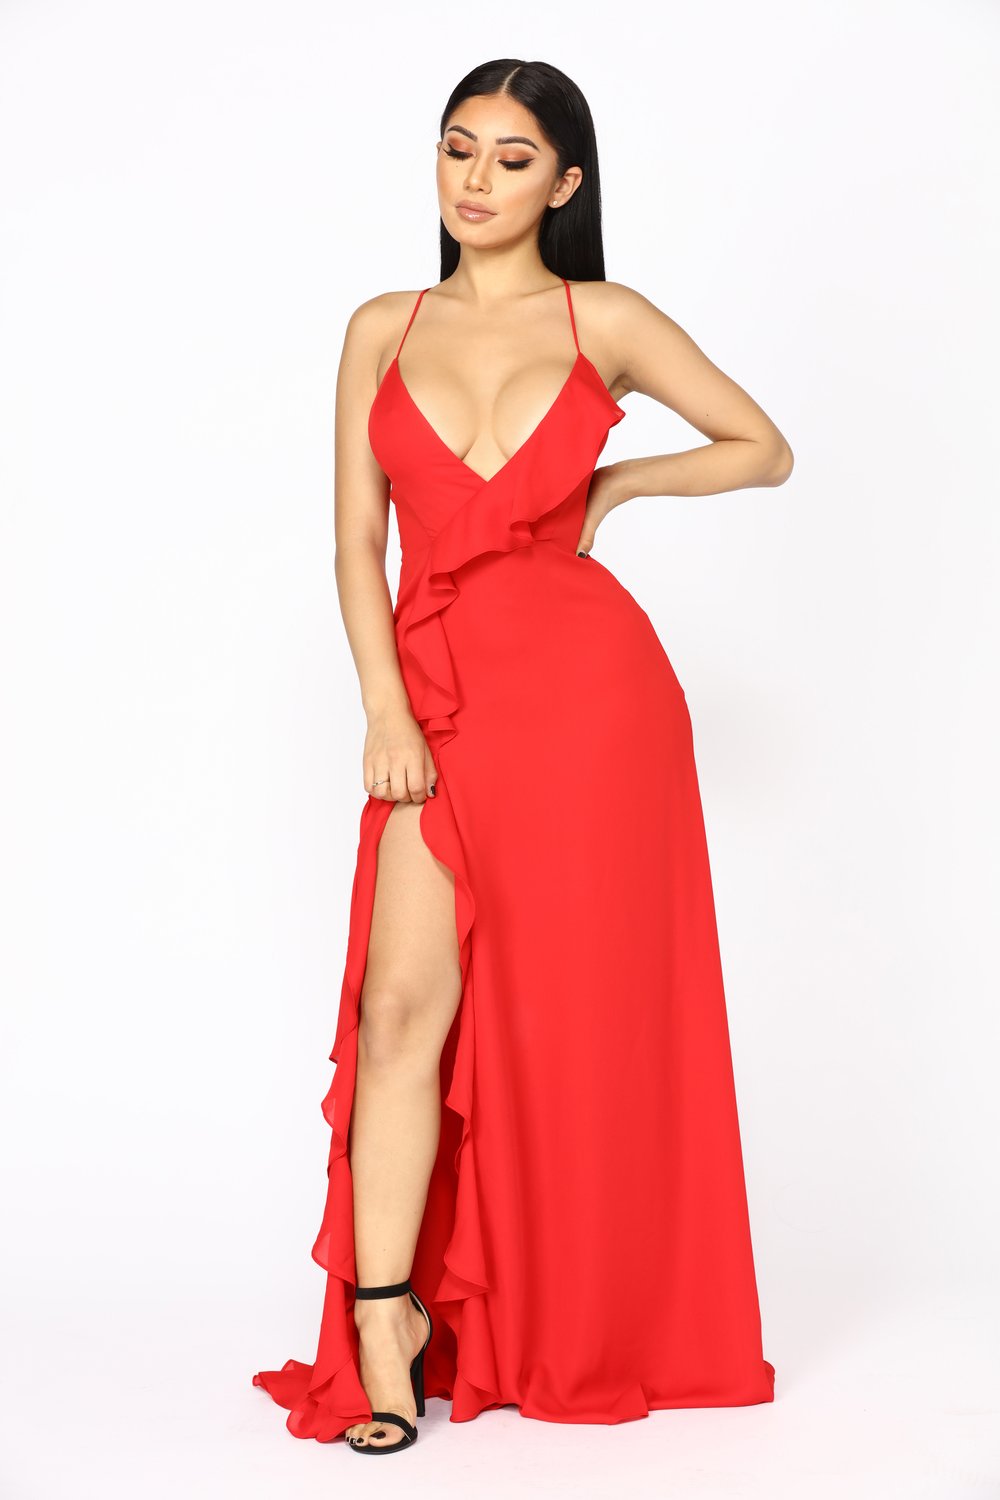 Valentine's Day Date Outfit Ideas From Fashion Nova Frugal